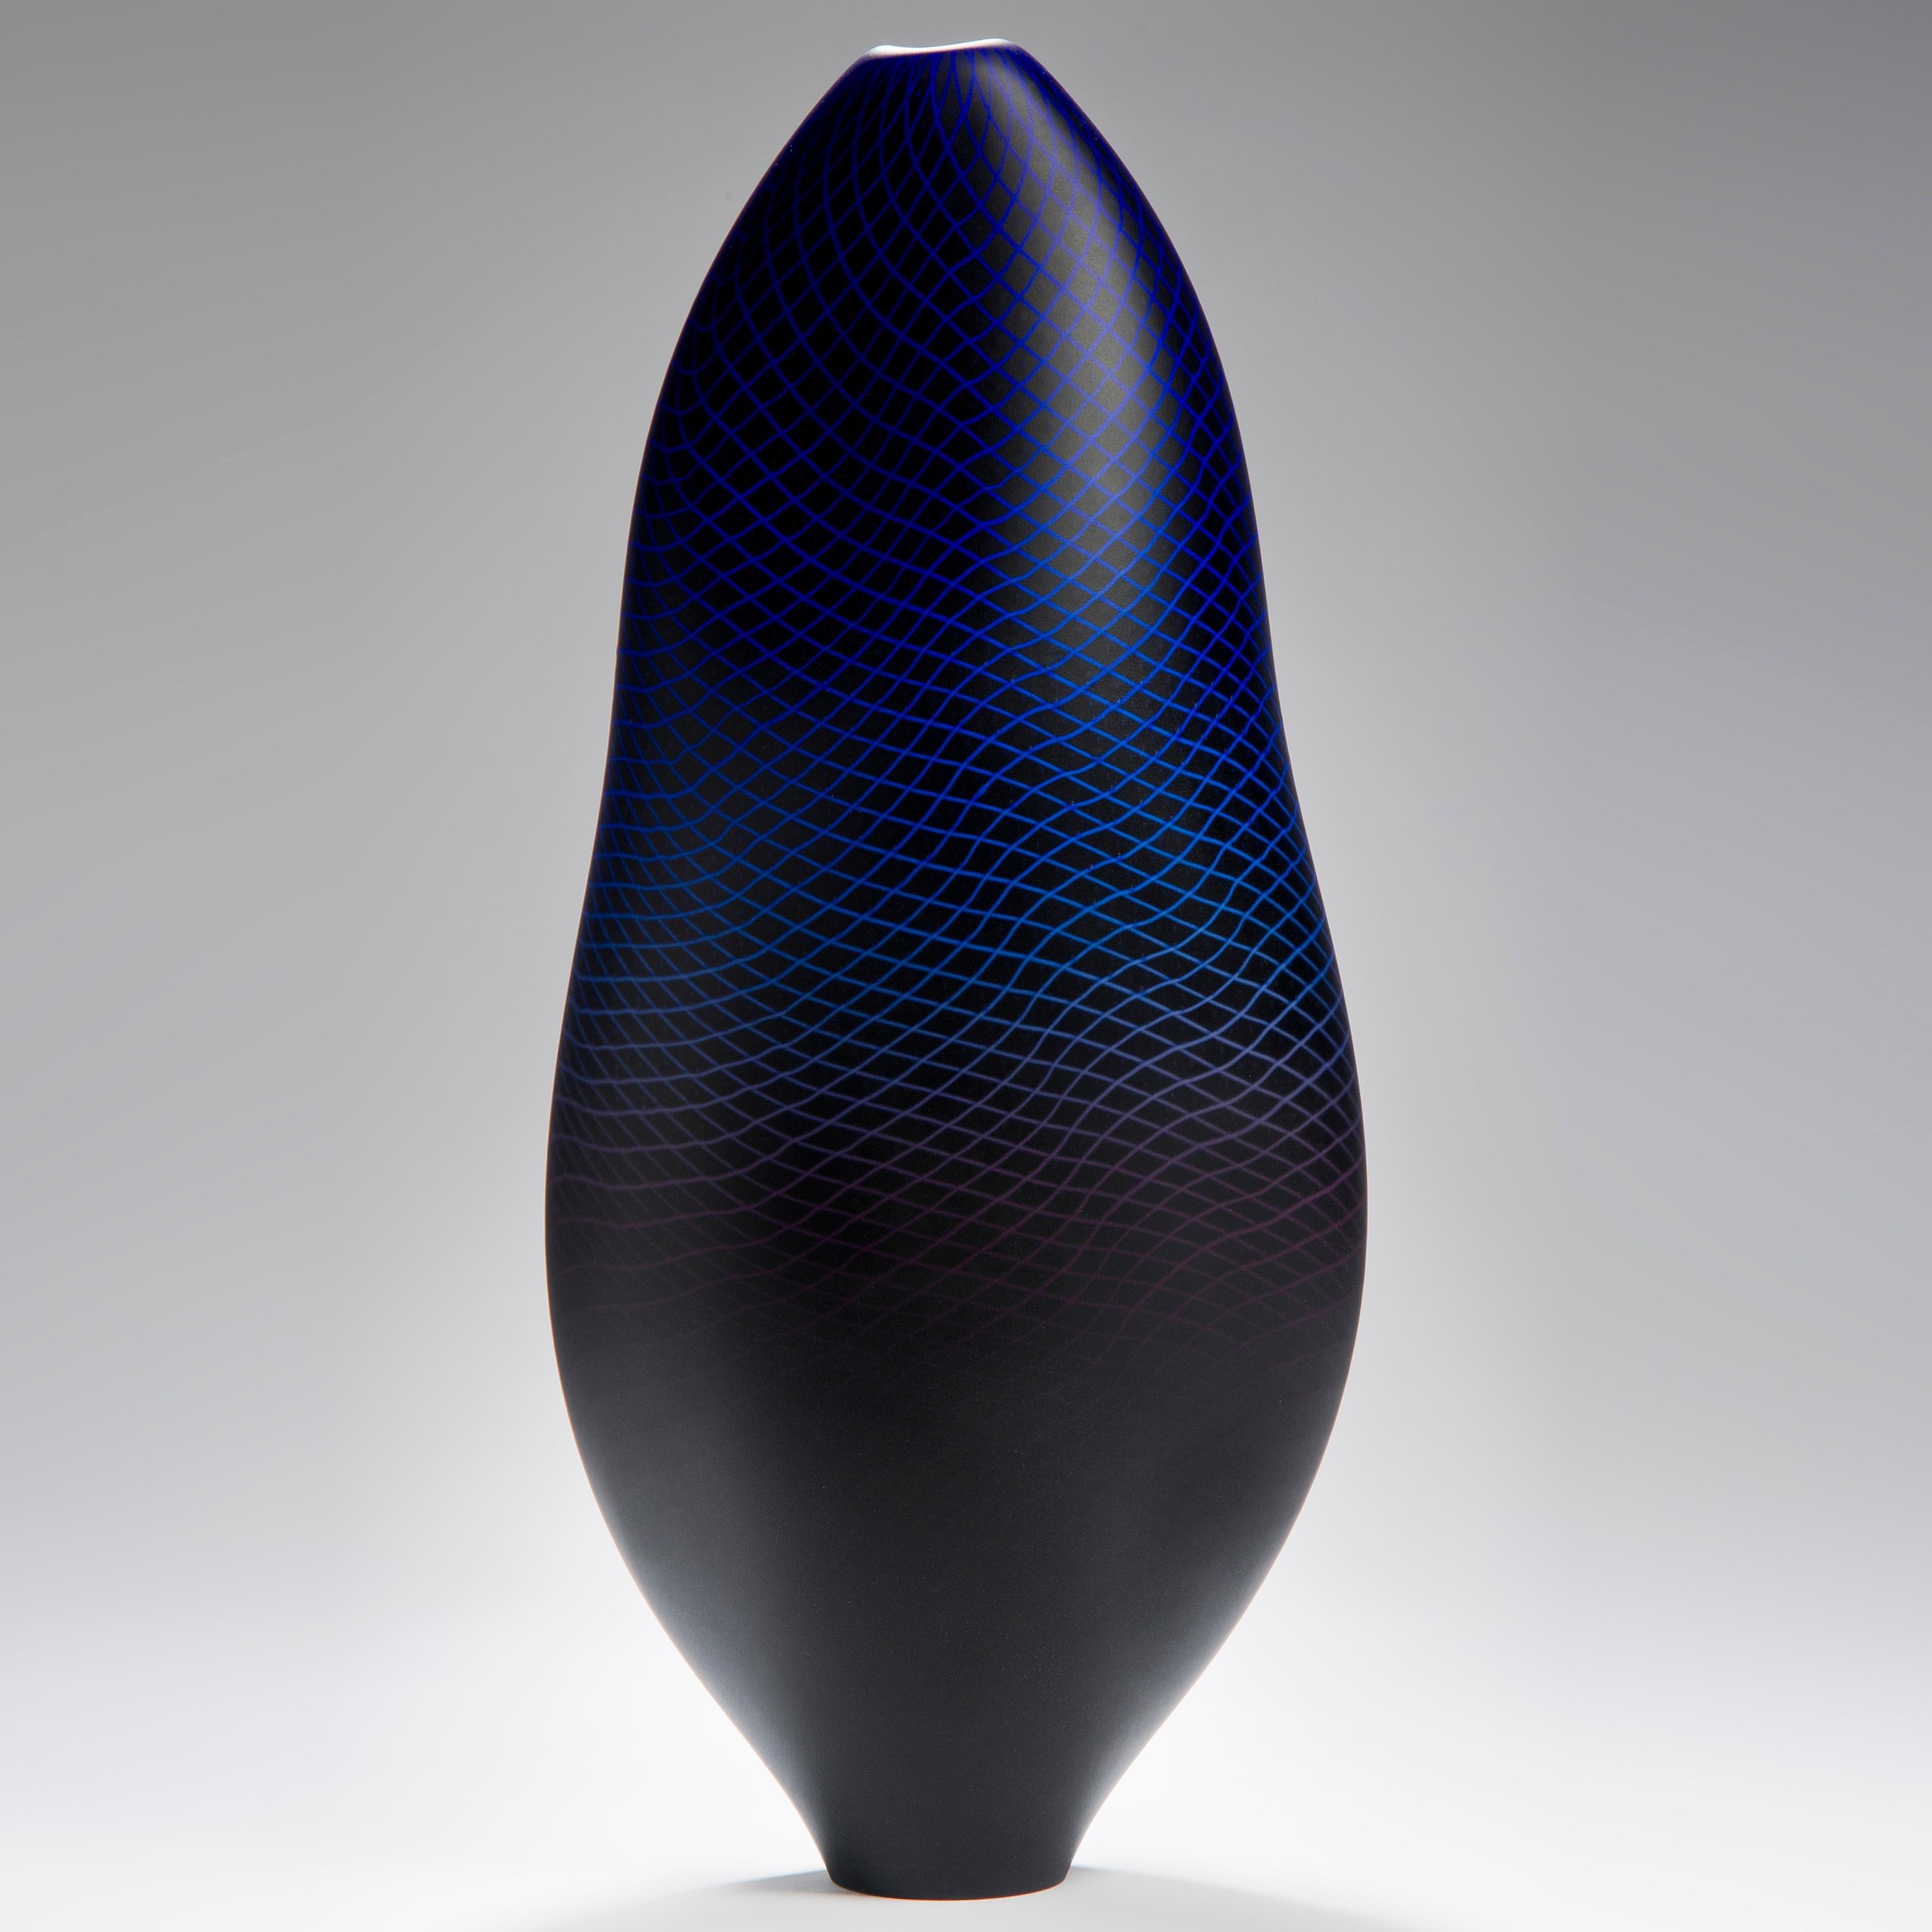 Warp/Fade/Distort 001, is a unique hand blown glass vessel with fine filigree white cane detail by the British artist Liam Reeves. The two colors of glass in purple and blue, merge in the making, over a layer of black glass, to create a larger